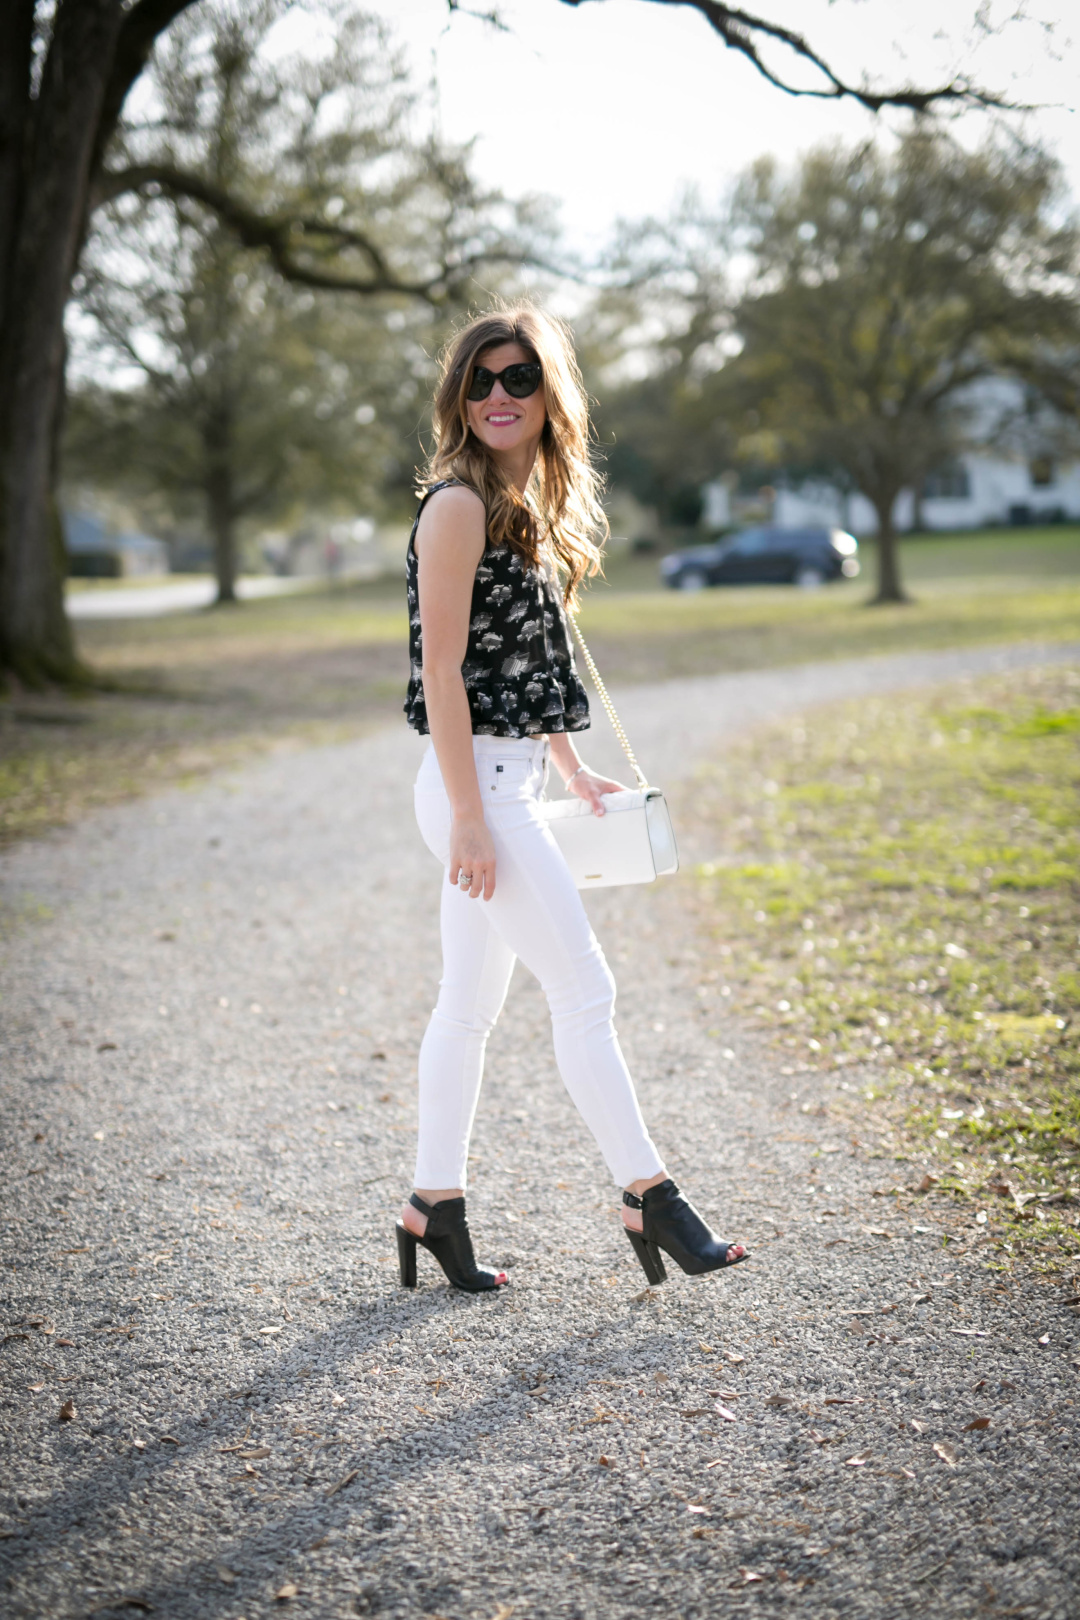 How to Wear White After Labor Day - Rules of Wearing White After LDW